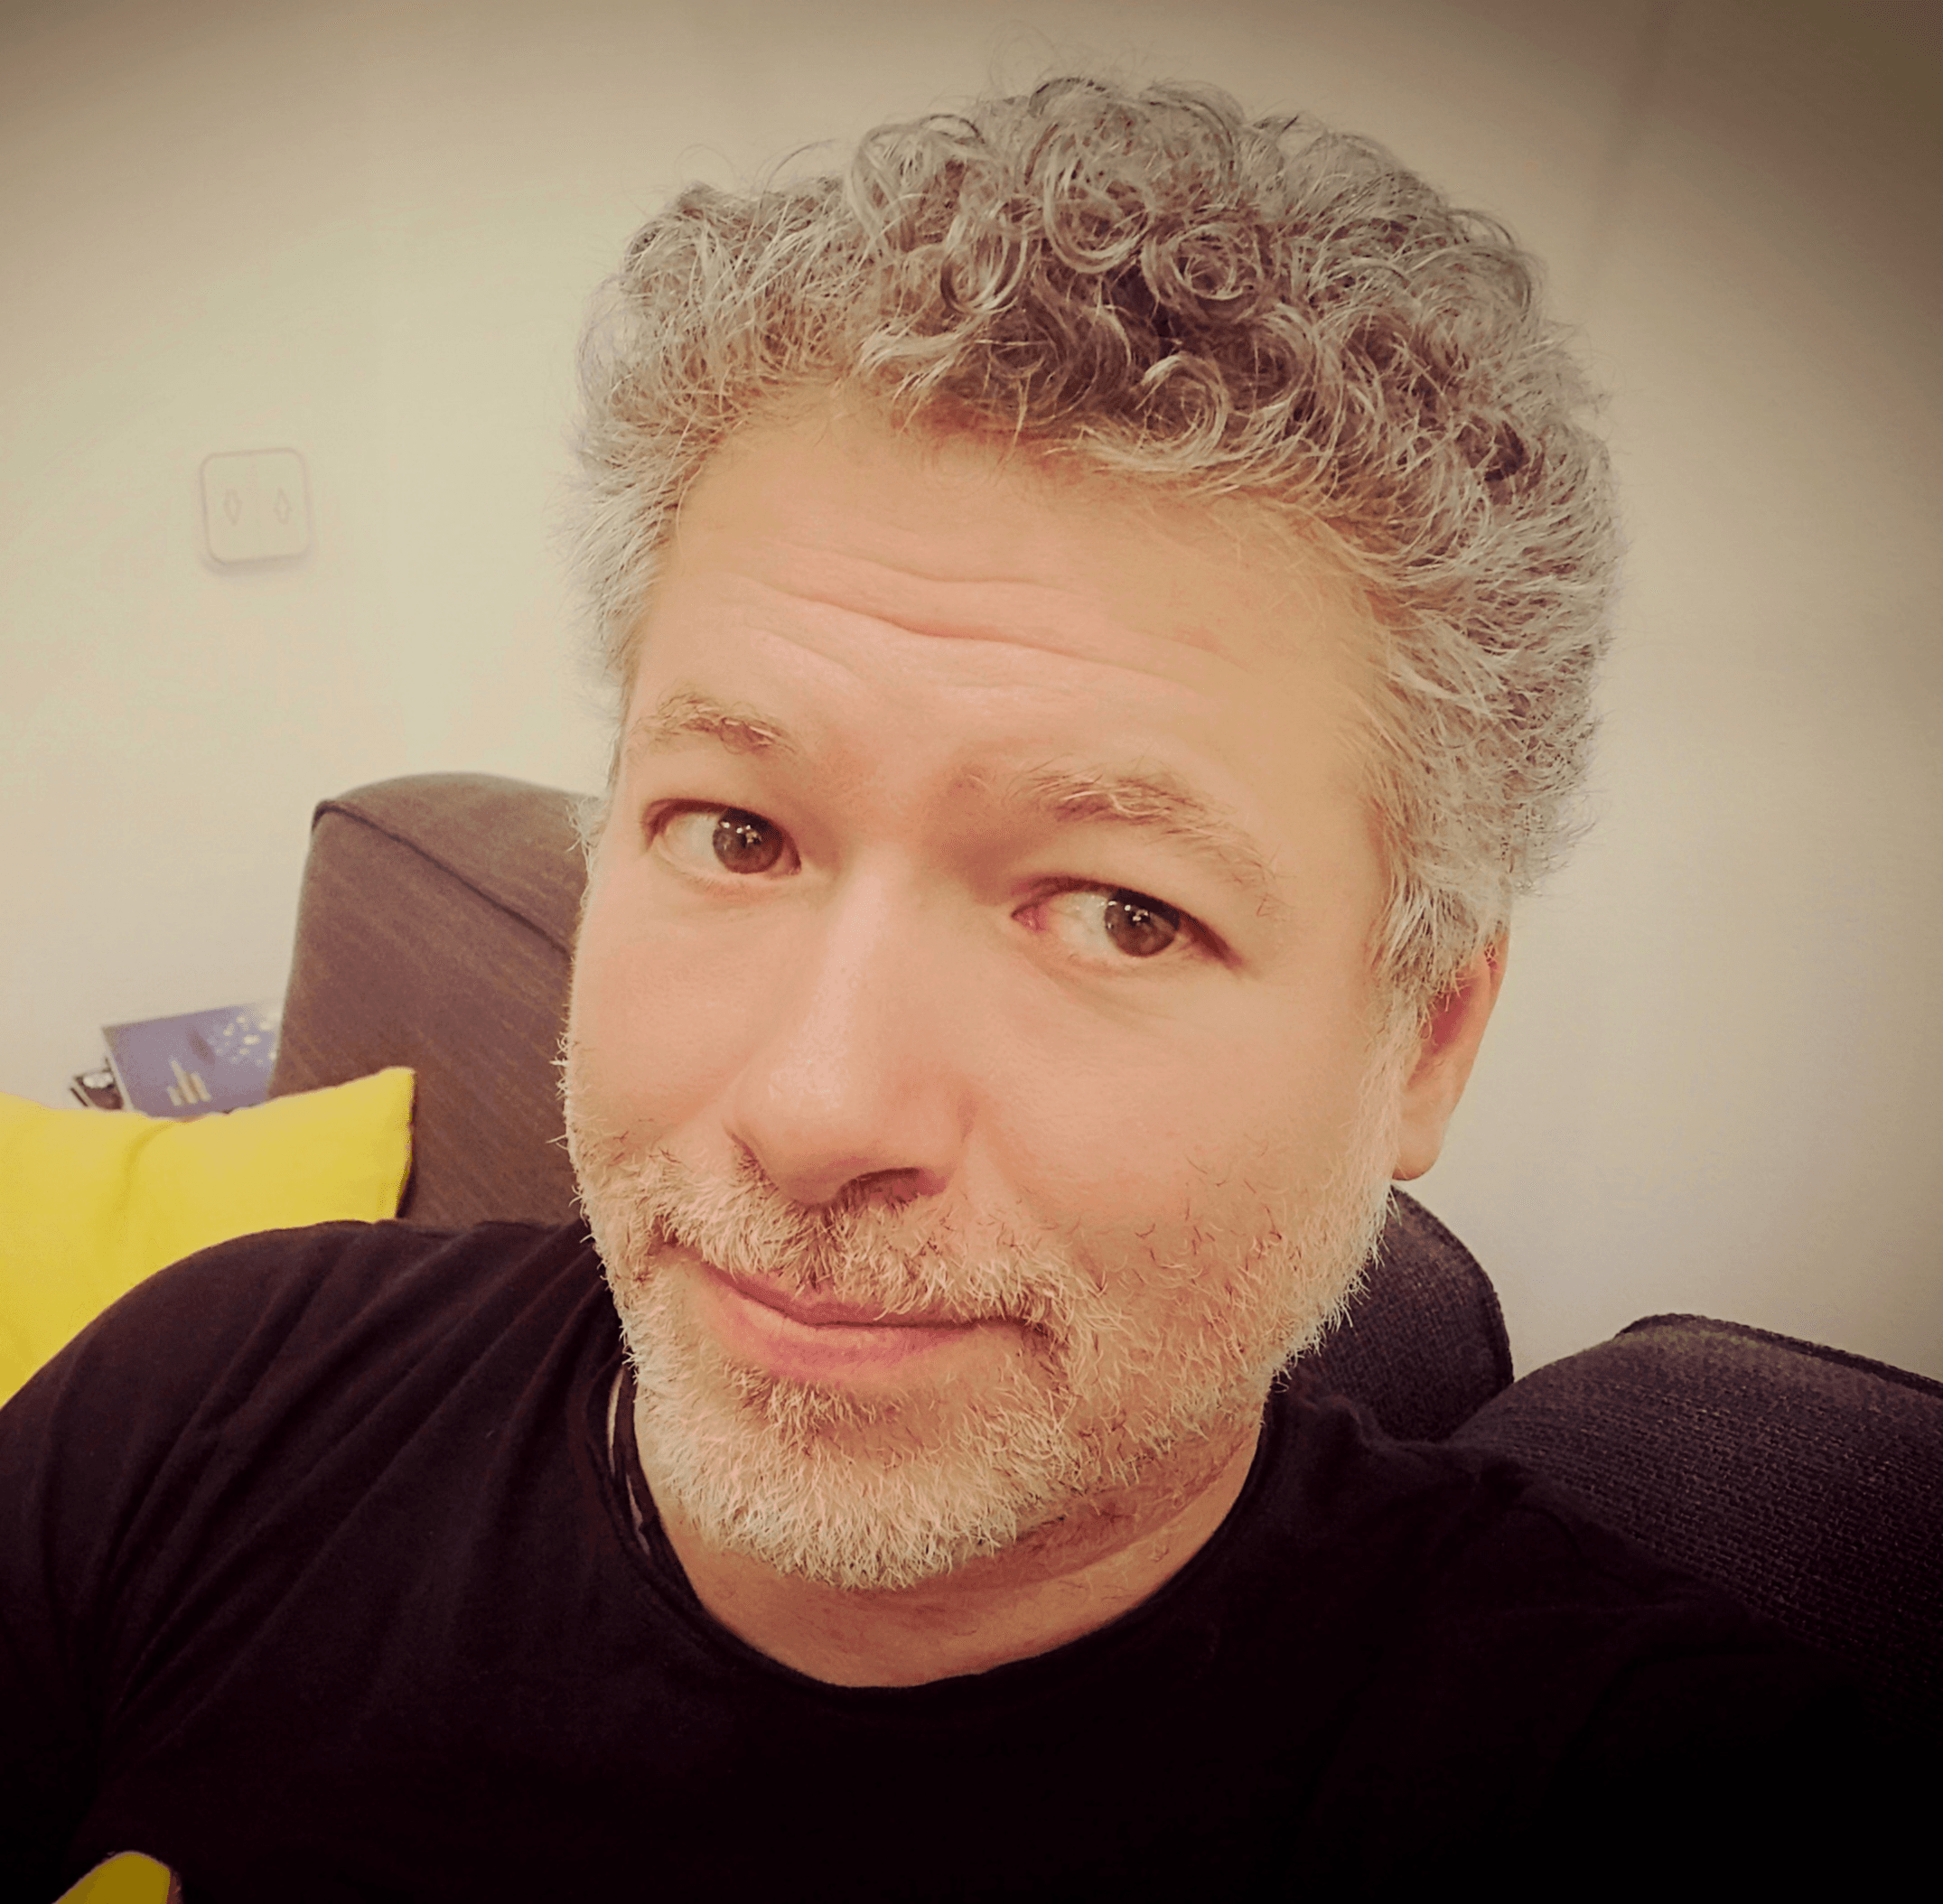 A close-up portrait of a middle-aged man with curly gray hair and a slight smile, sitting in a room with a yellow pillow and blue sofa in the background.